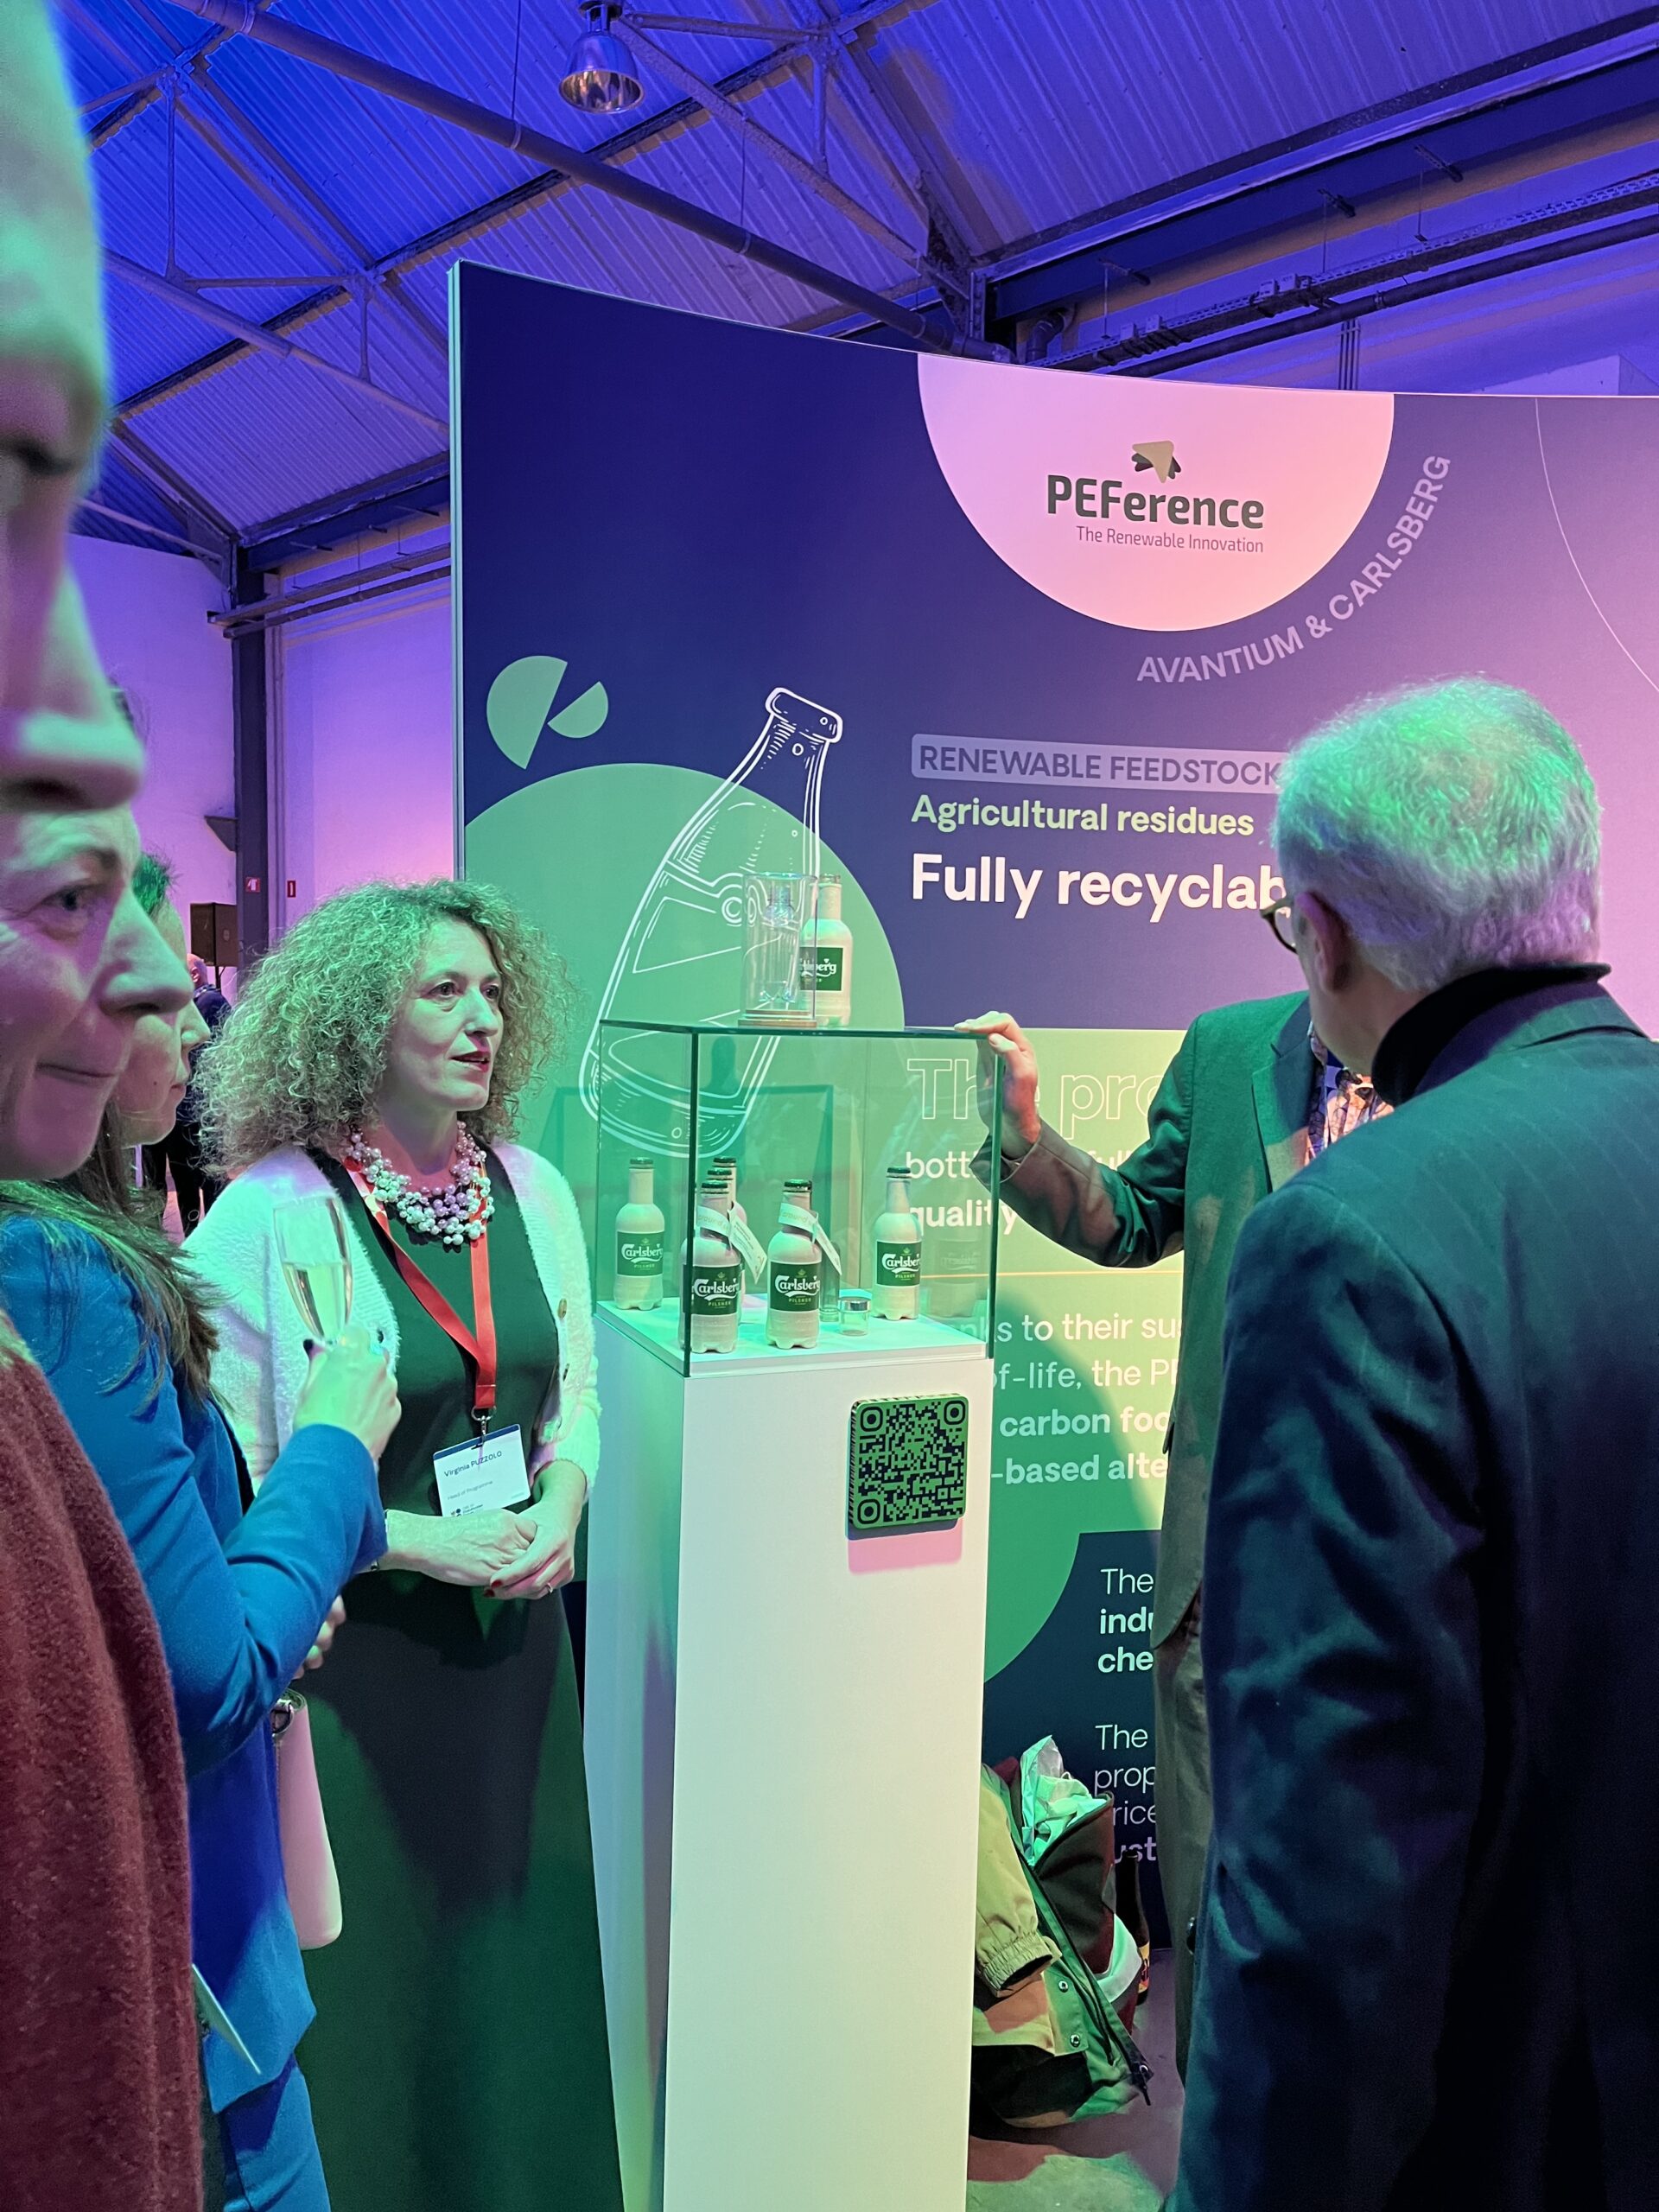 Virginia Puzzolo opens the Carlsberg Group's paper bottles in a glass display to an interested audience. Green and violet lights.